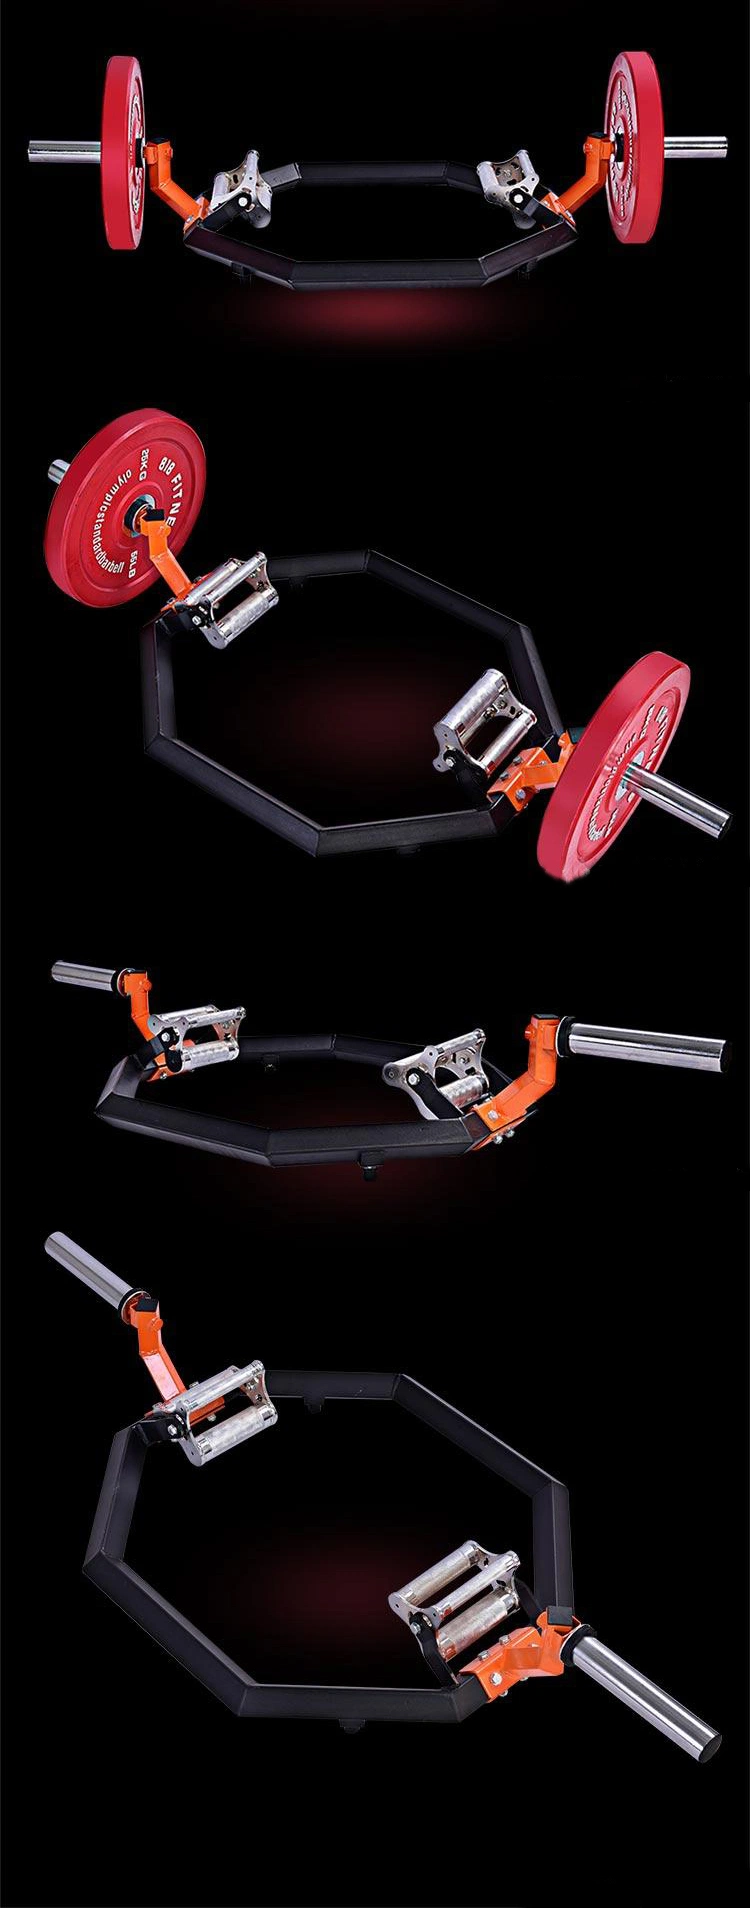 Commercial Power Lifting Gym Equipment Body Building Fitness Weight Lifting Rotating Hex Bar